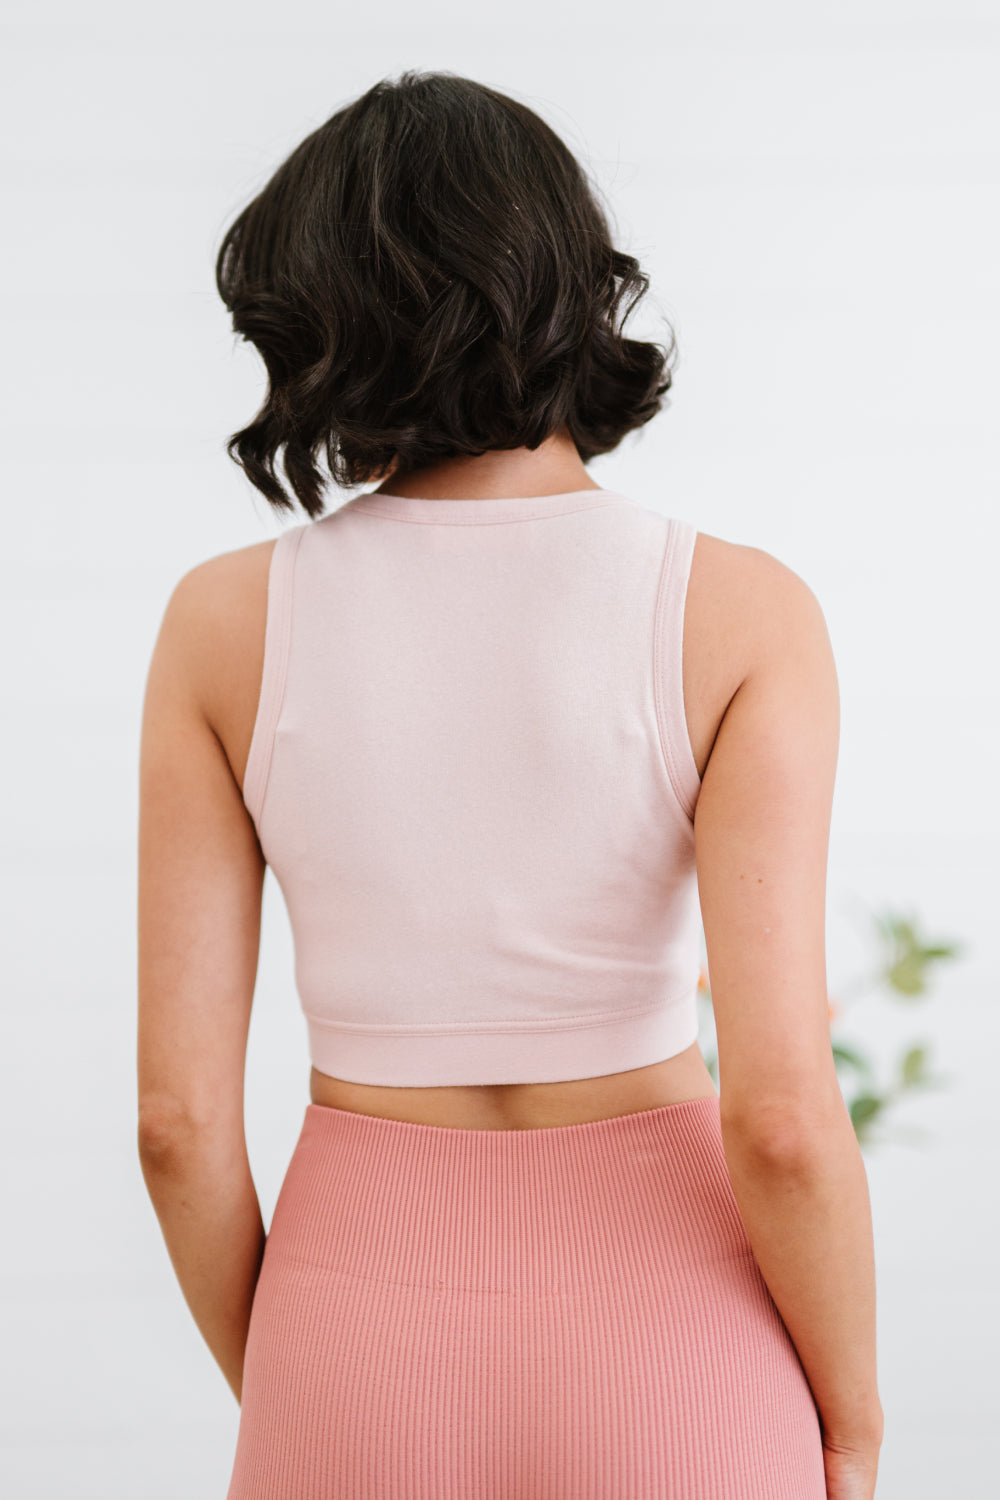 Simplest of Things Cropped Tank in Pastel Pink